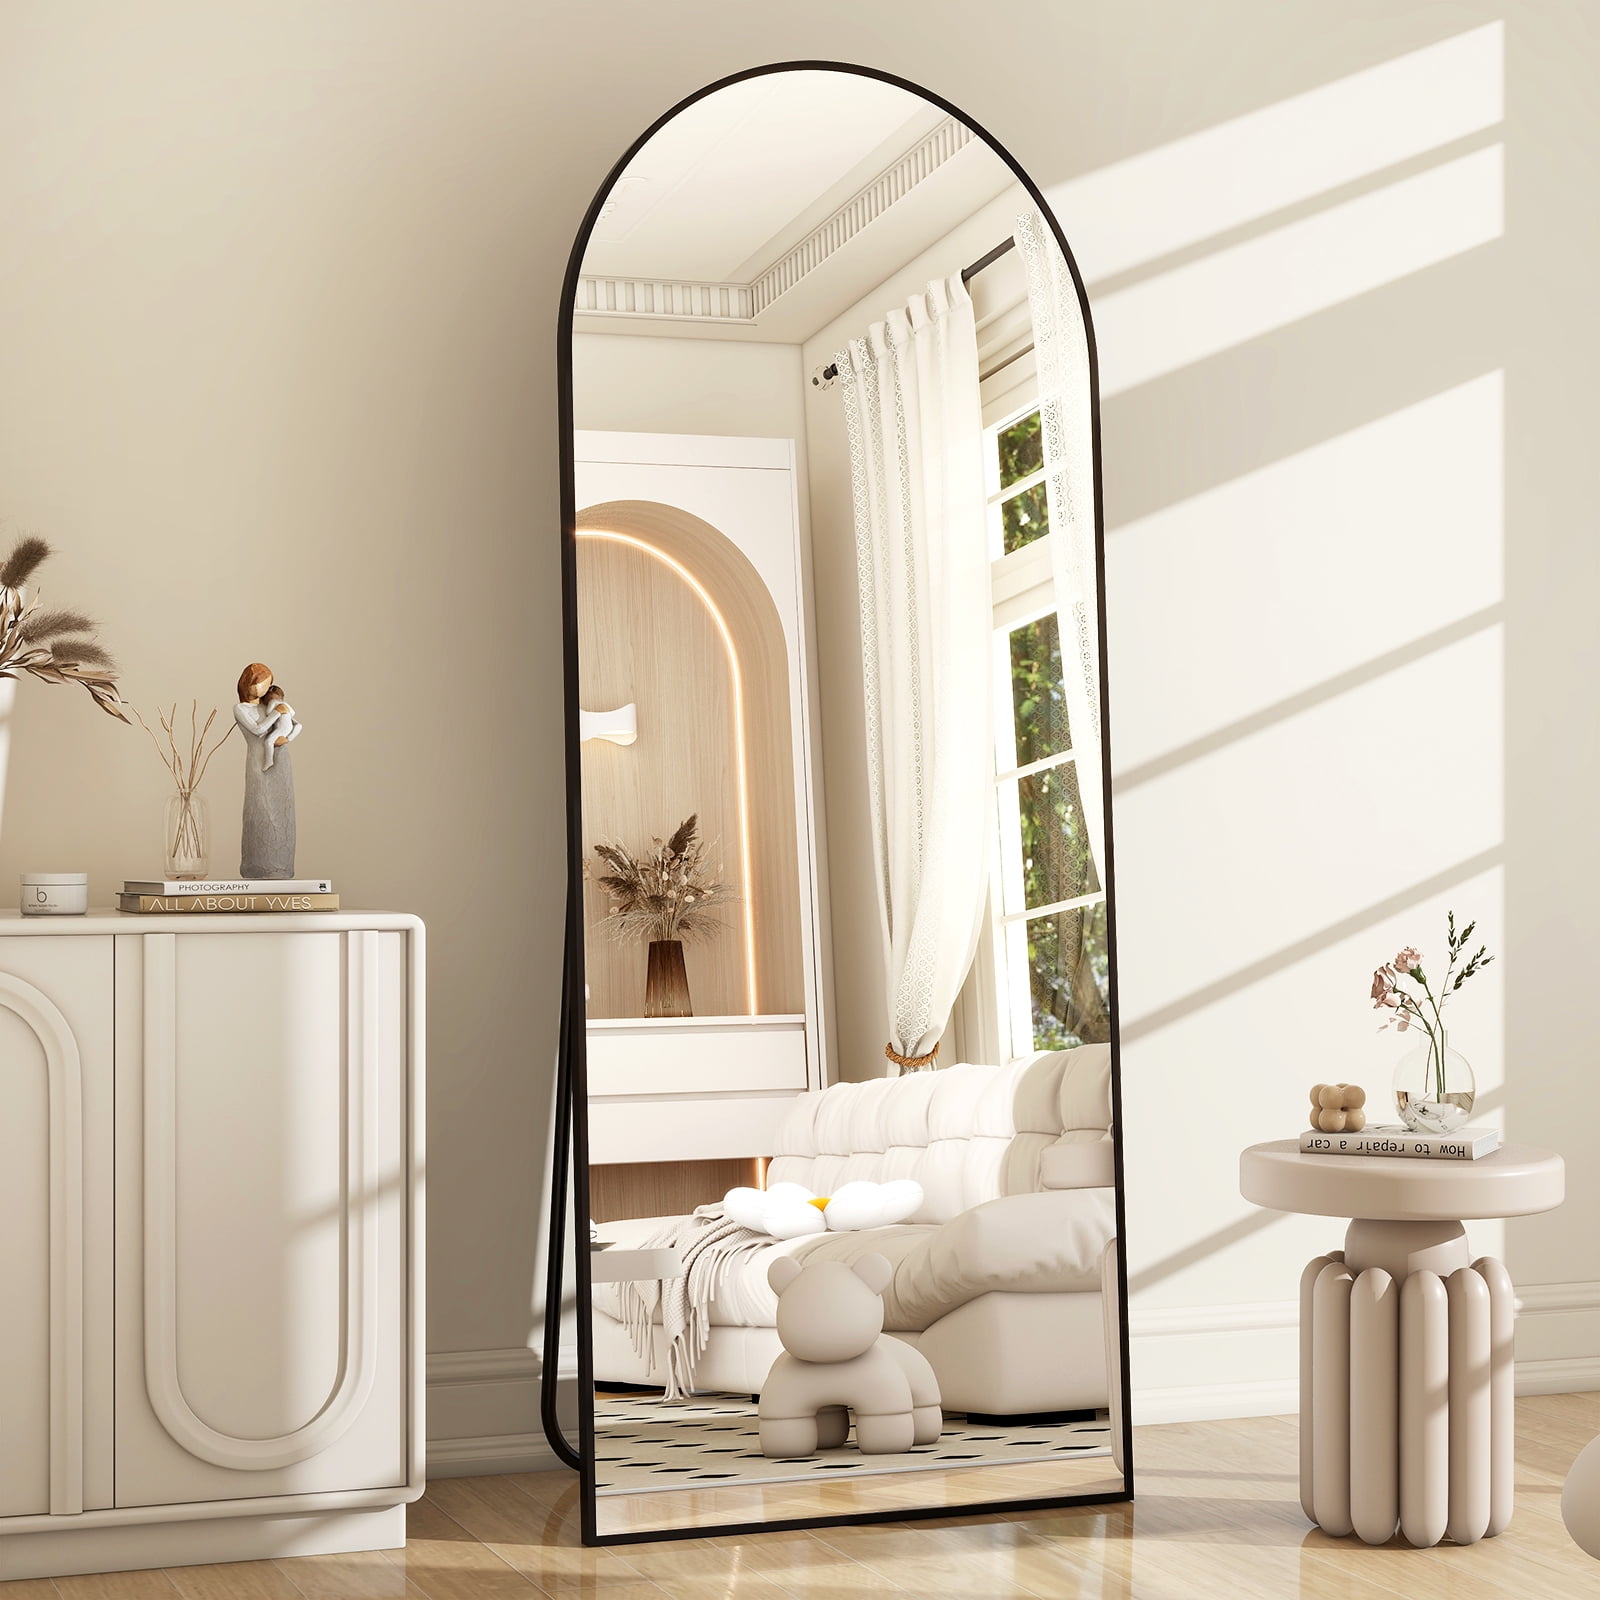 64" x 21" BeautyPeak Arched Full Length Mirror w/ Stand (Black) $59 + Free Shipping